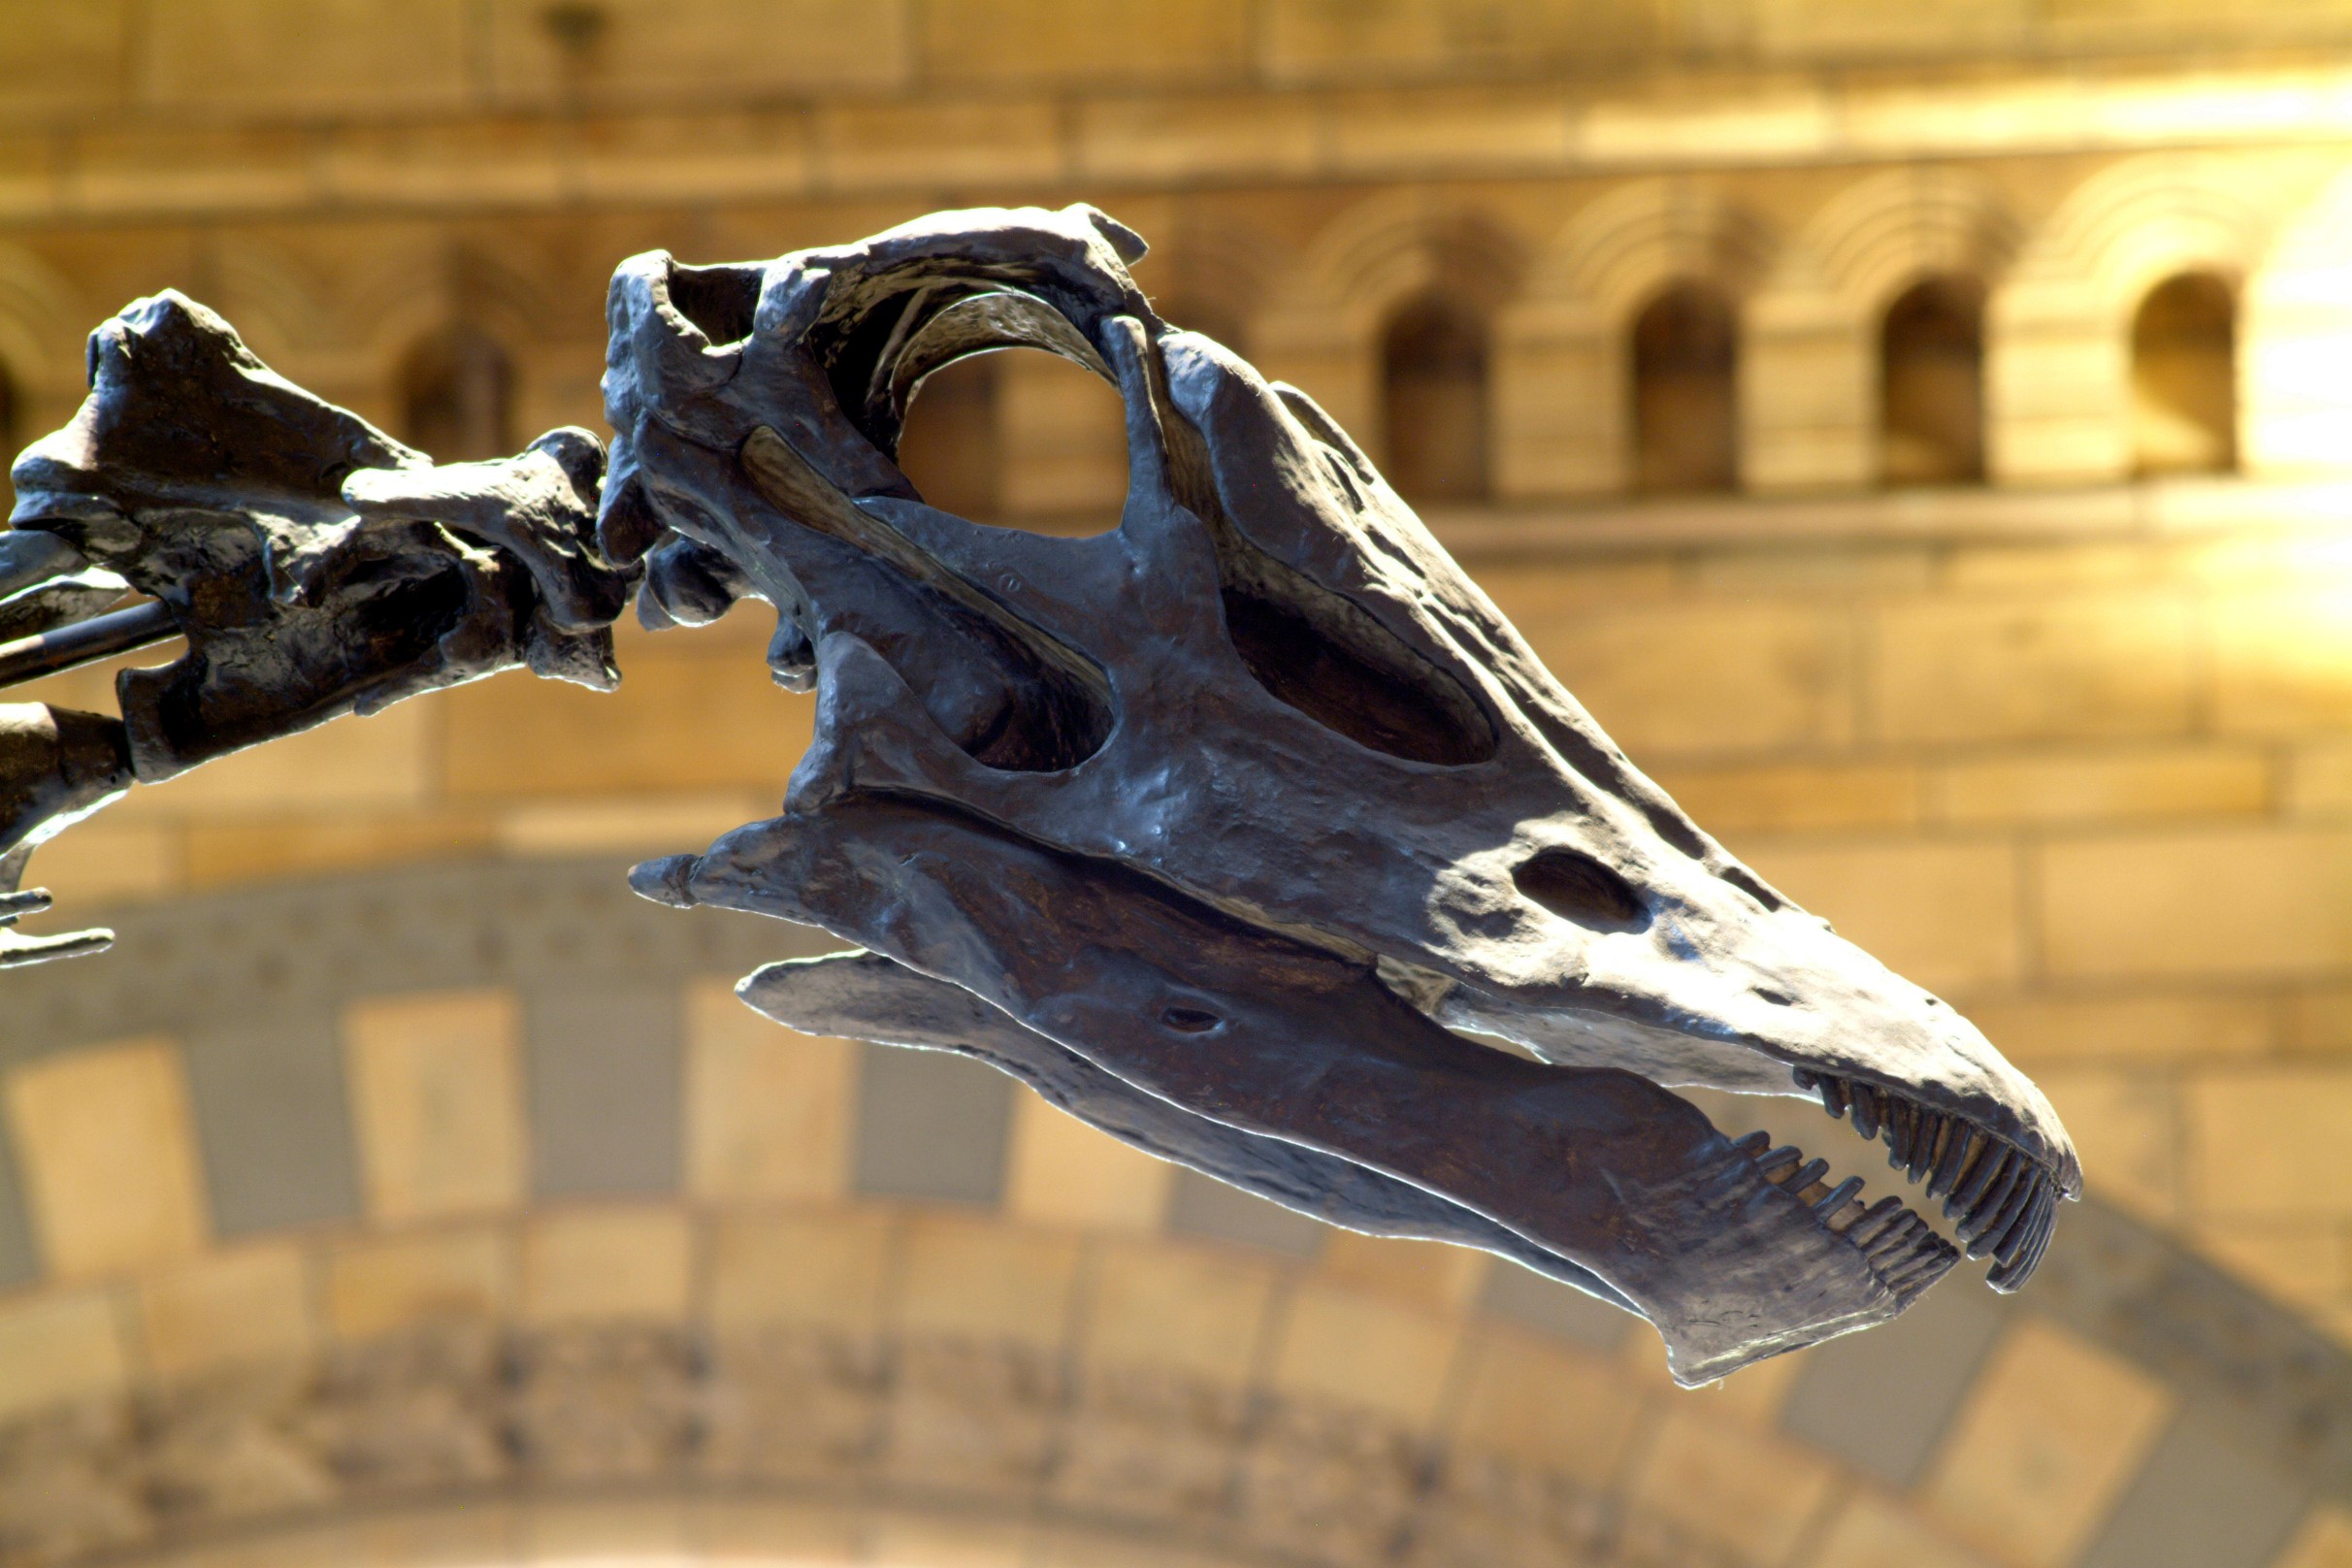 The head of Dippy the dinosaur on display at the Natural History Museum